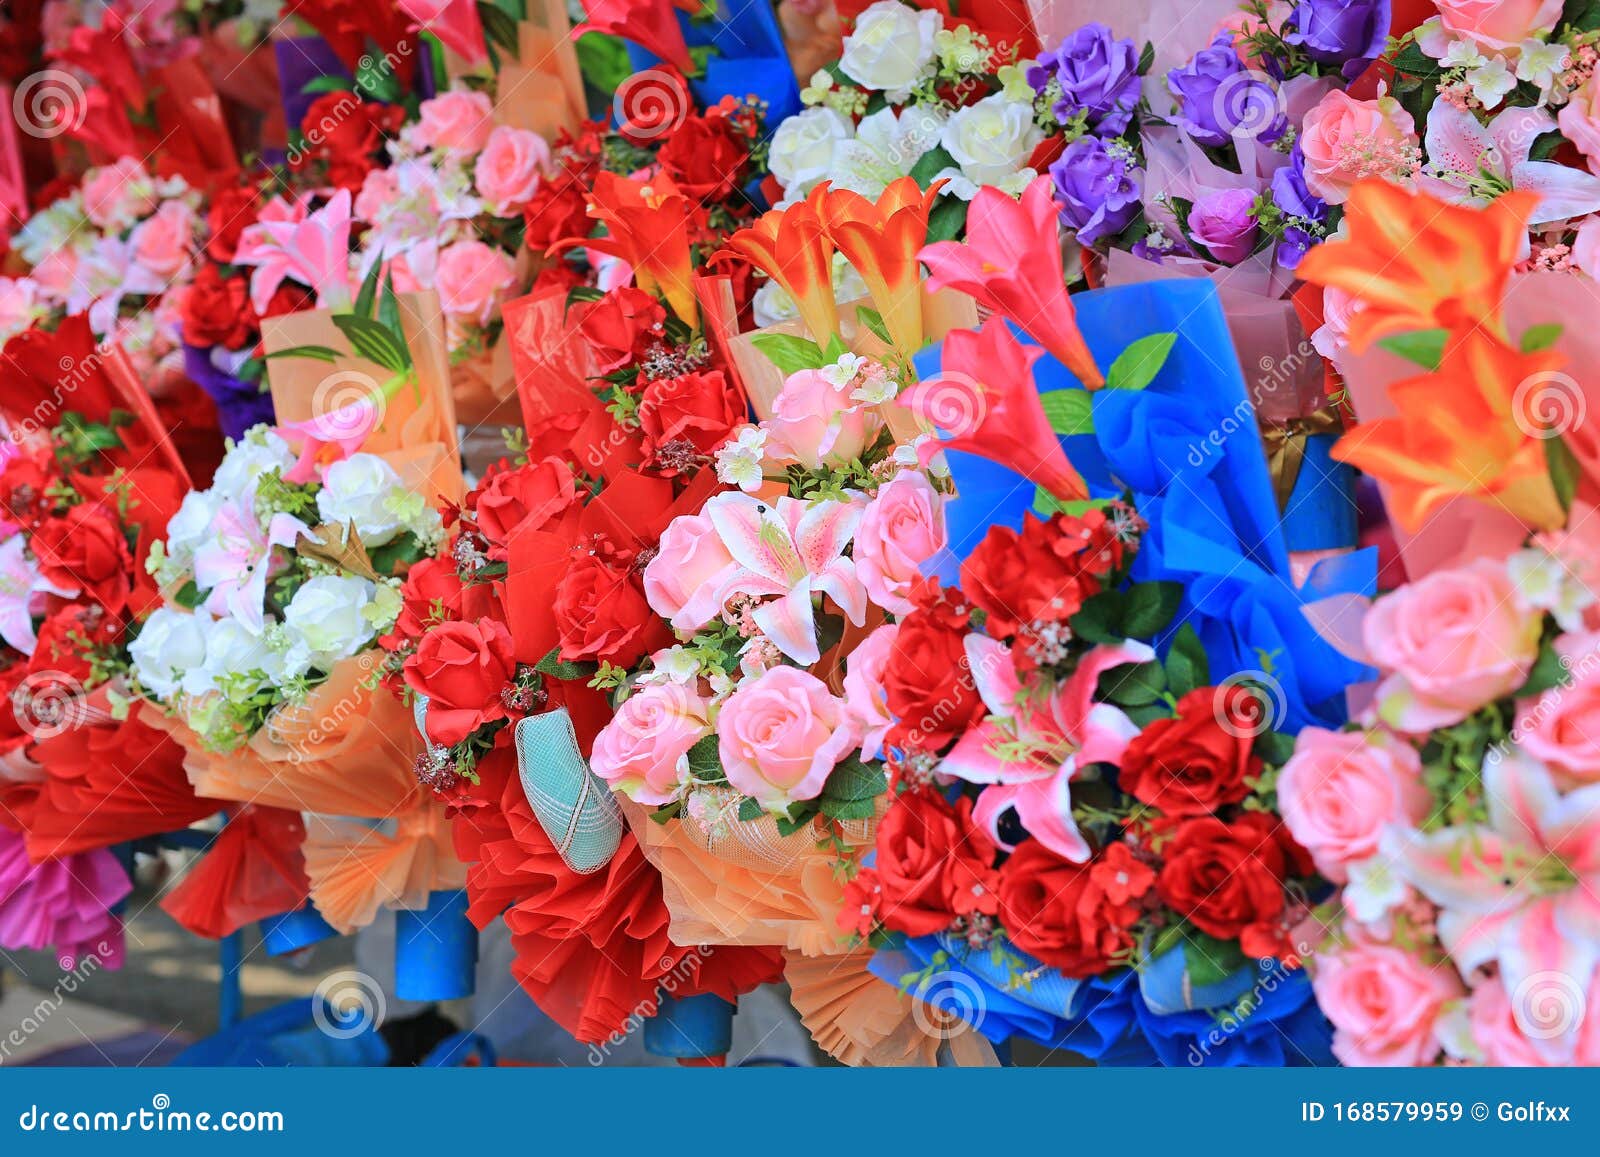 Beautiful Bouquet Rose Flower in the Row. Colorful Flowers Stock Image ...